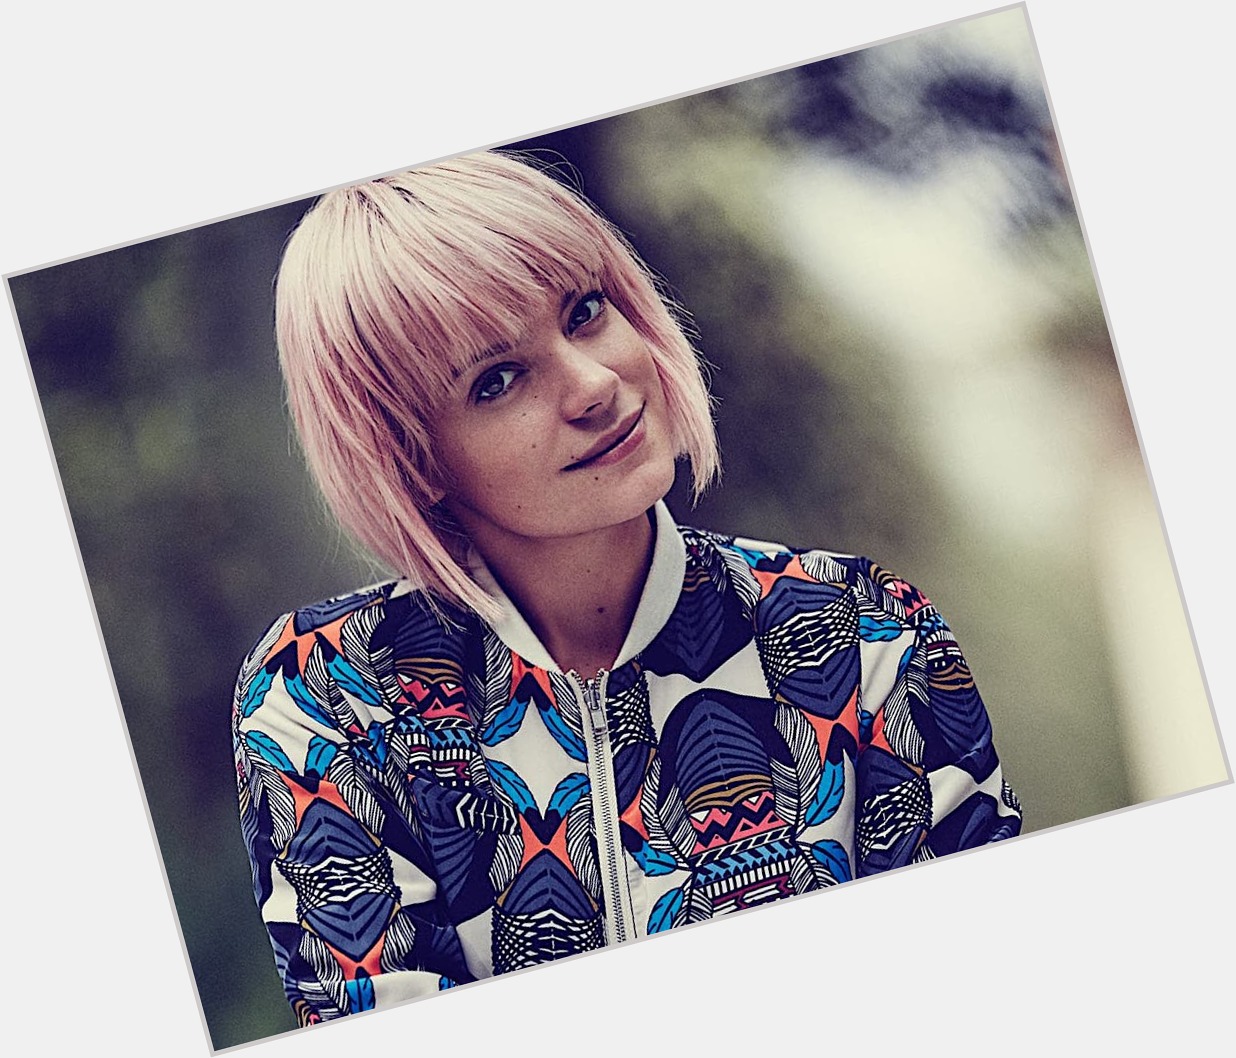 HAPPY 35TH BIRTHDAY LILY ALLEN    May 2, 1985 